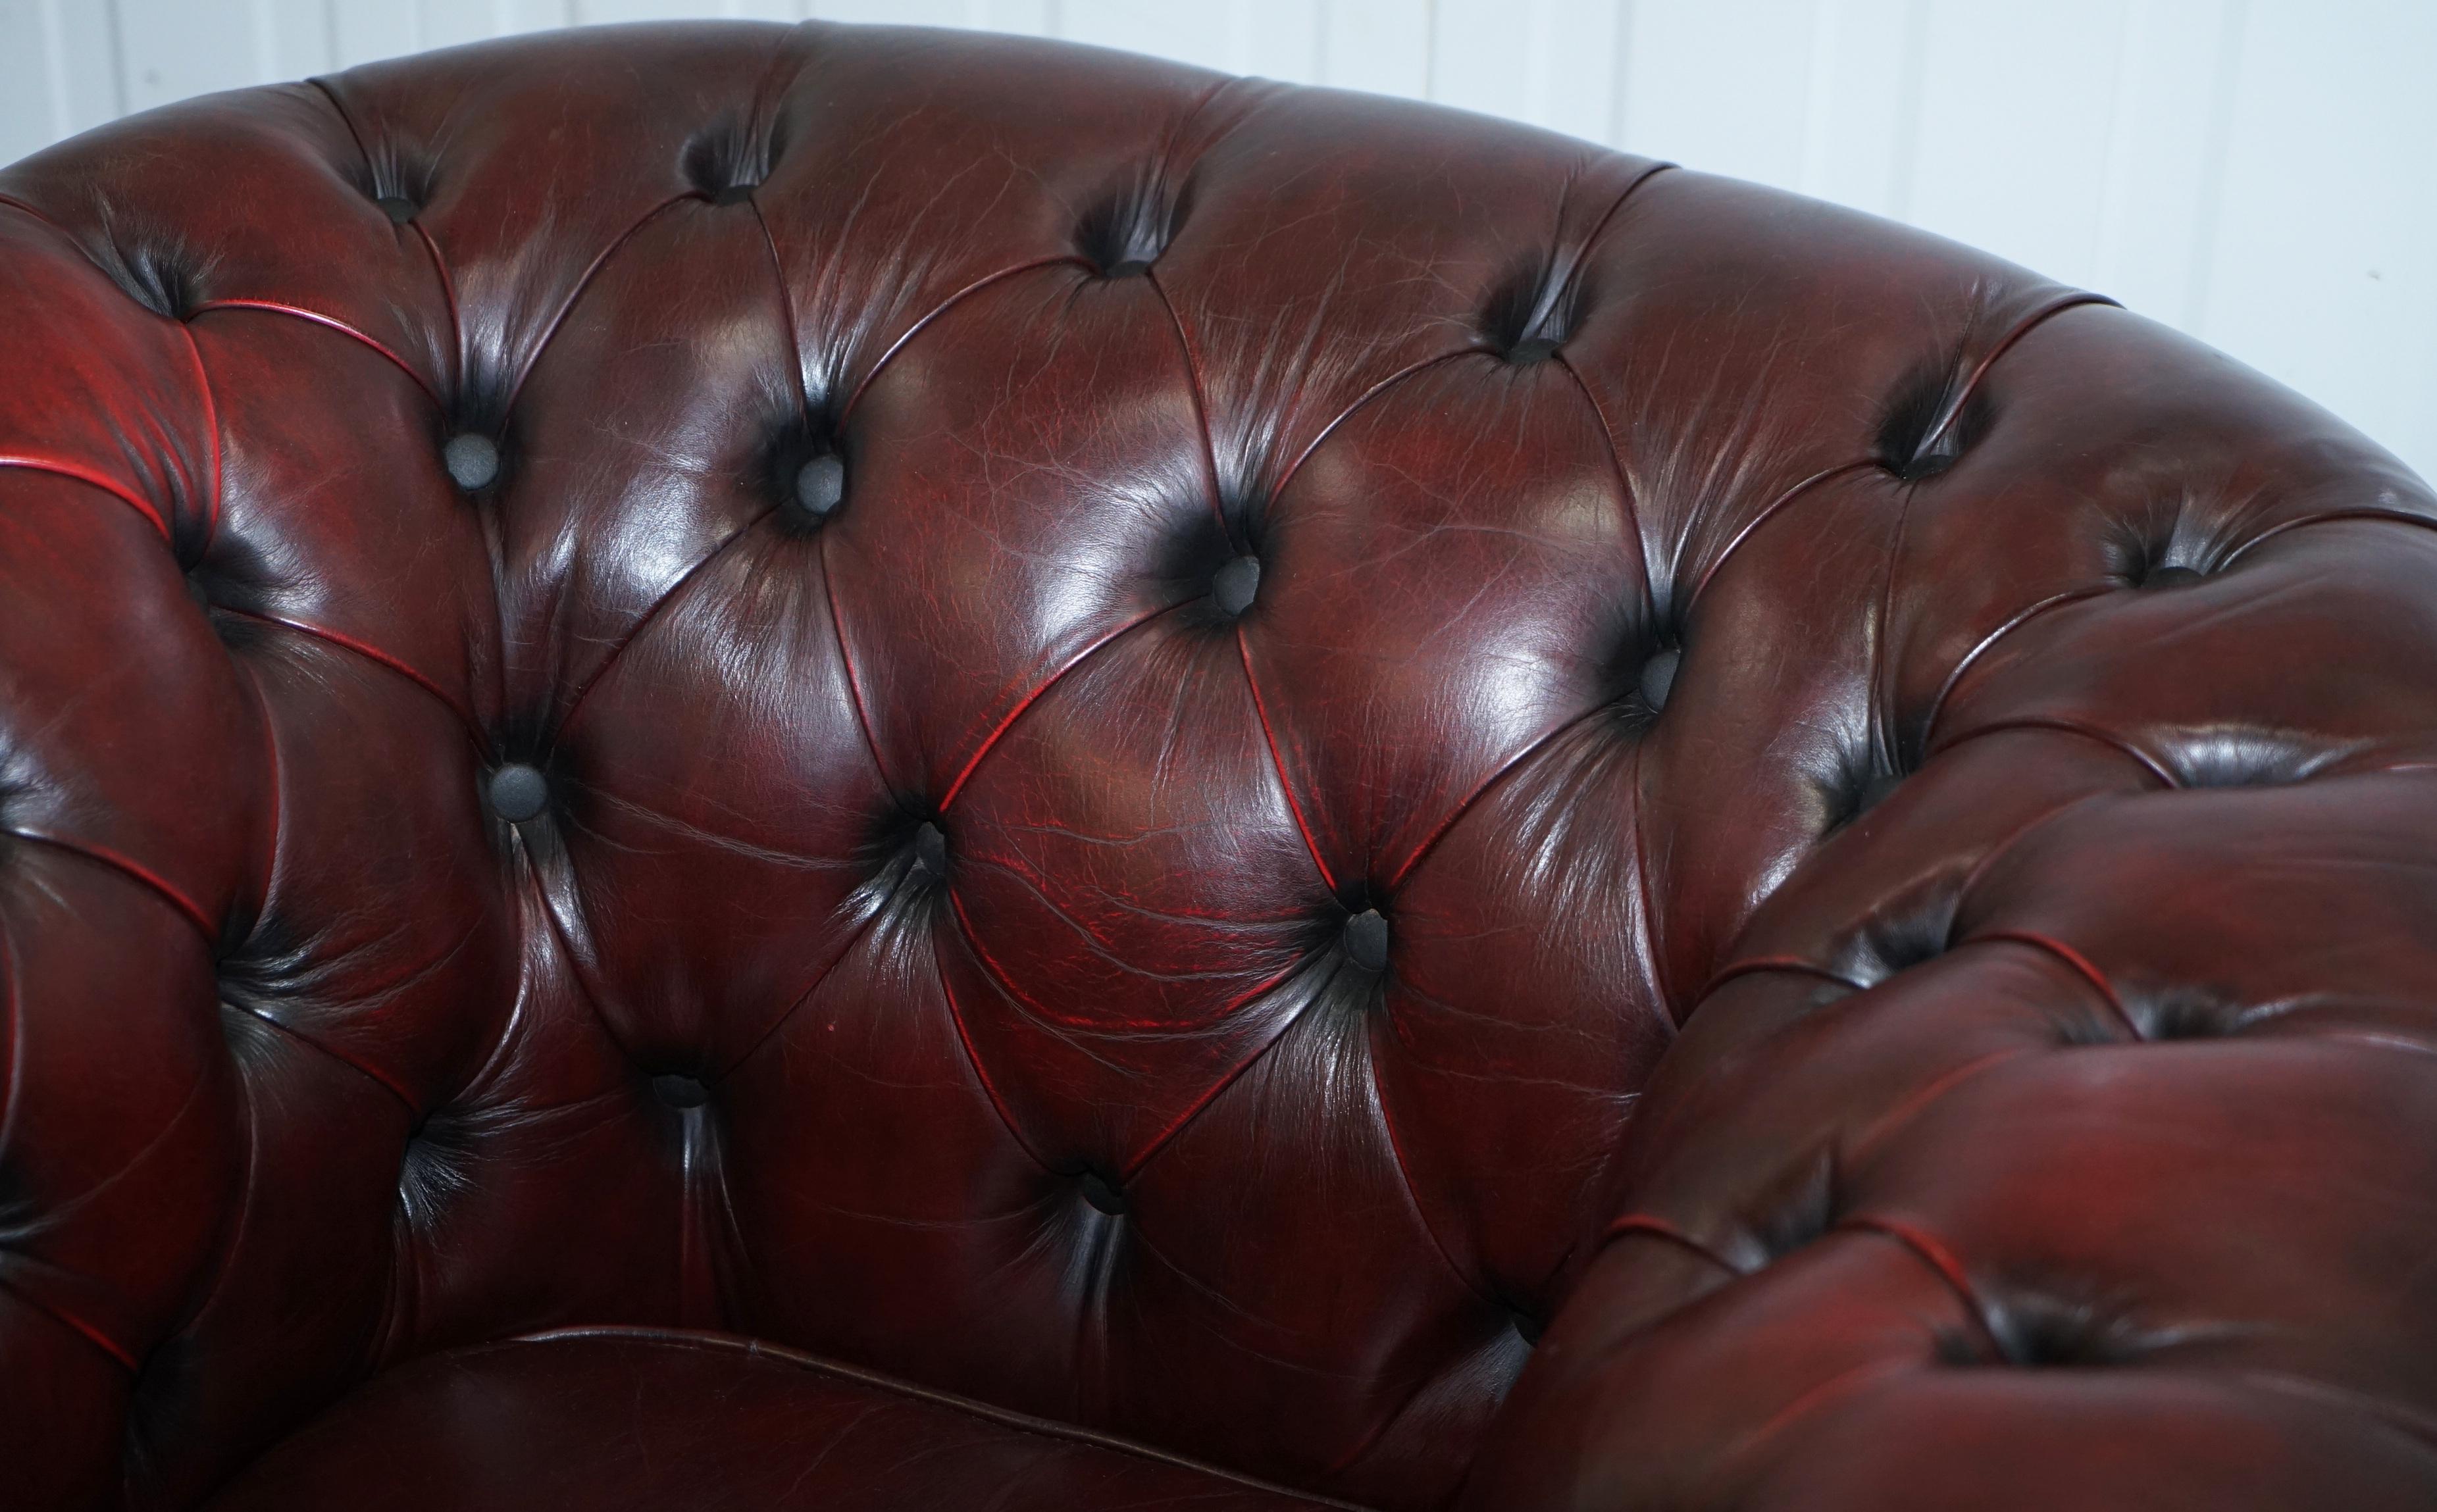 English Pair of Vintage Oxblood Leather Hand Made in England Chesterfield Club Armchairs